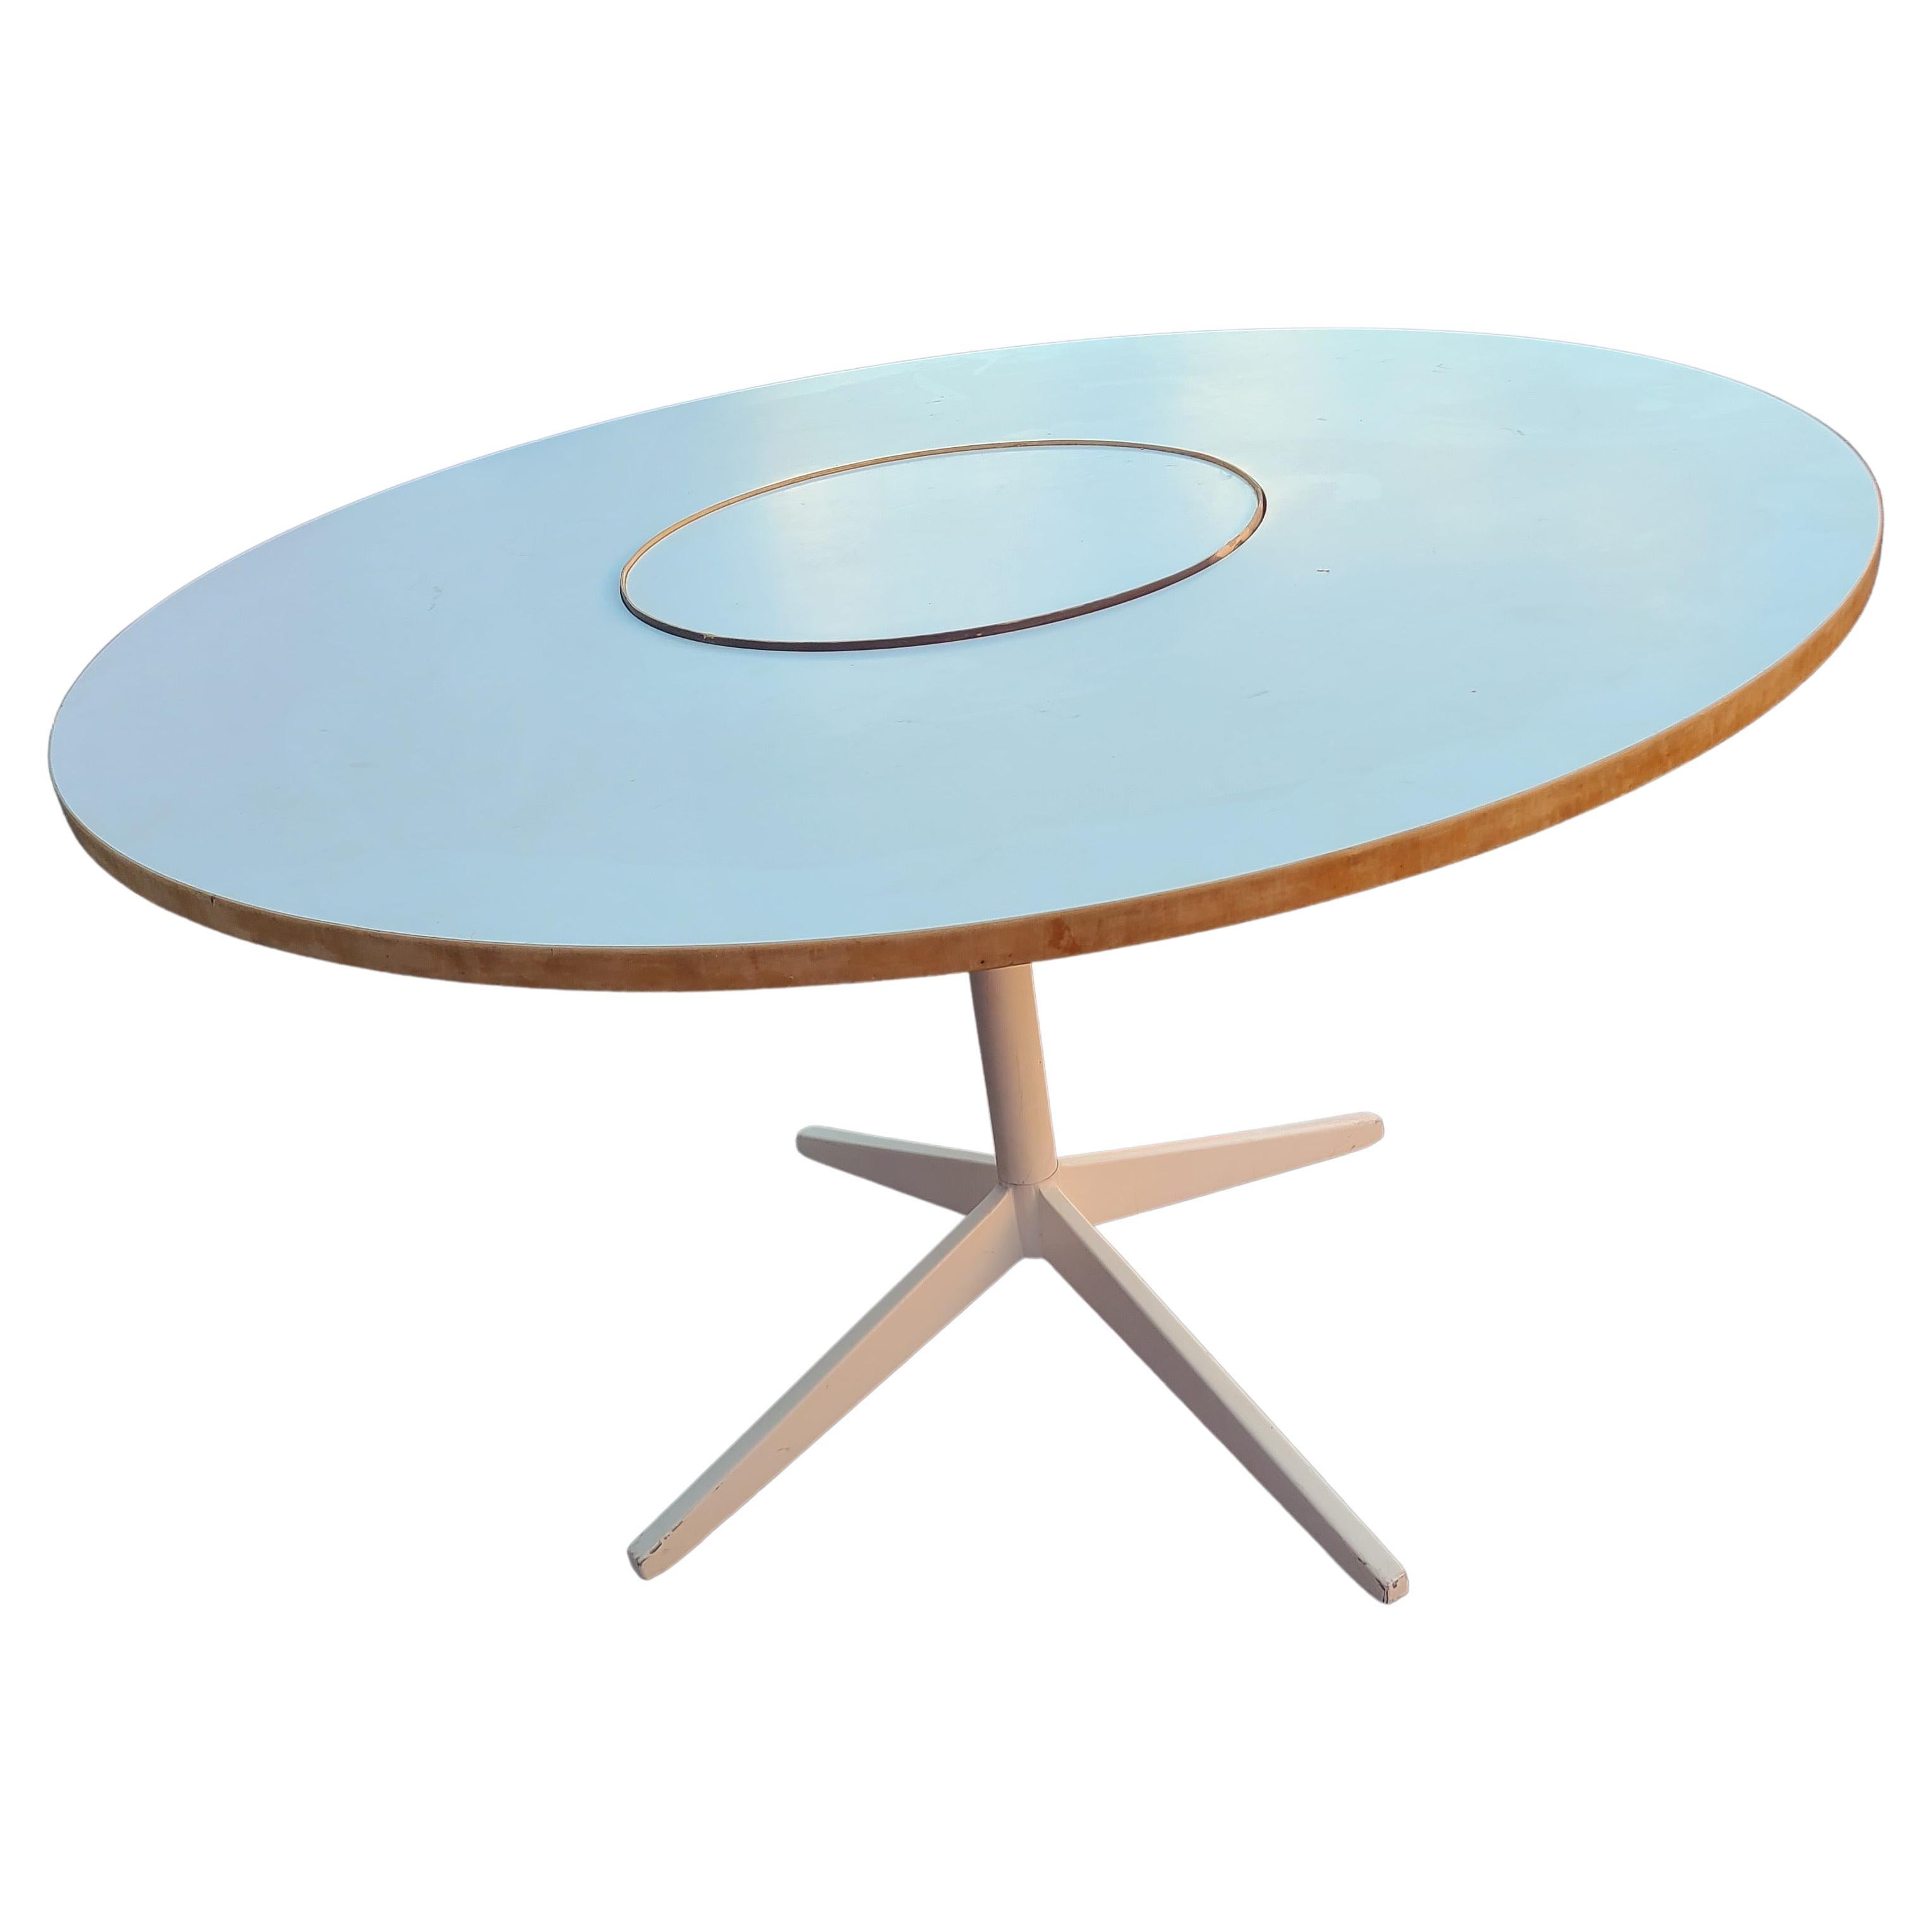 Please message us for a cost effective shipping quote to your location.

Pedestal dining table with rotating Lazy Susan center disc.
Designed by George Nelson for Herman Miller.
  